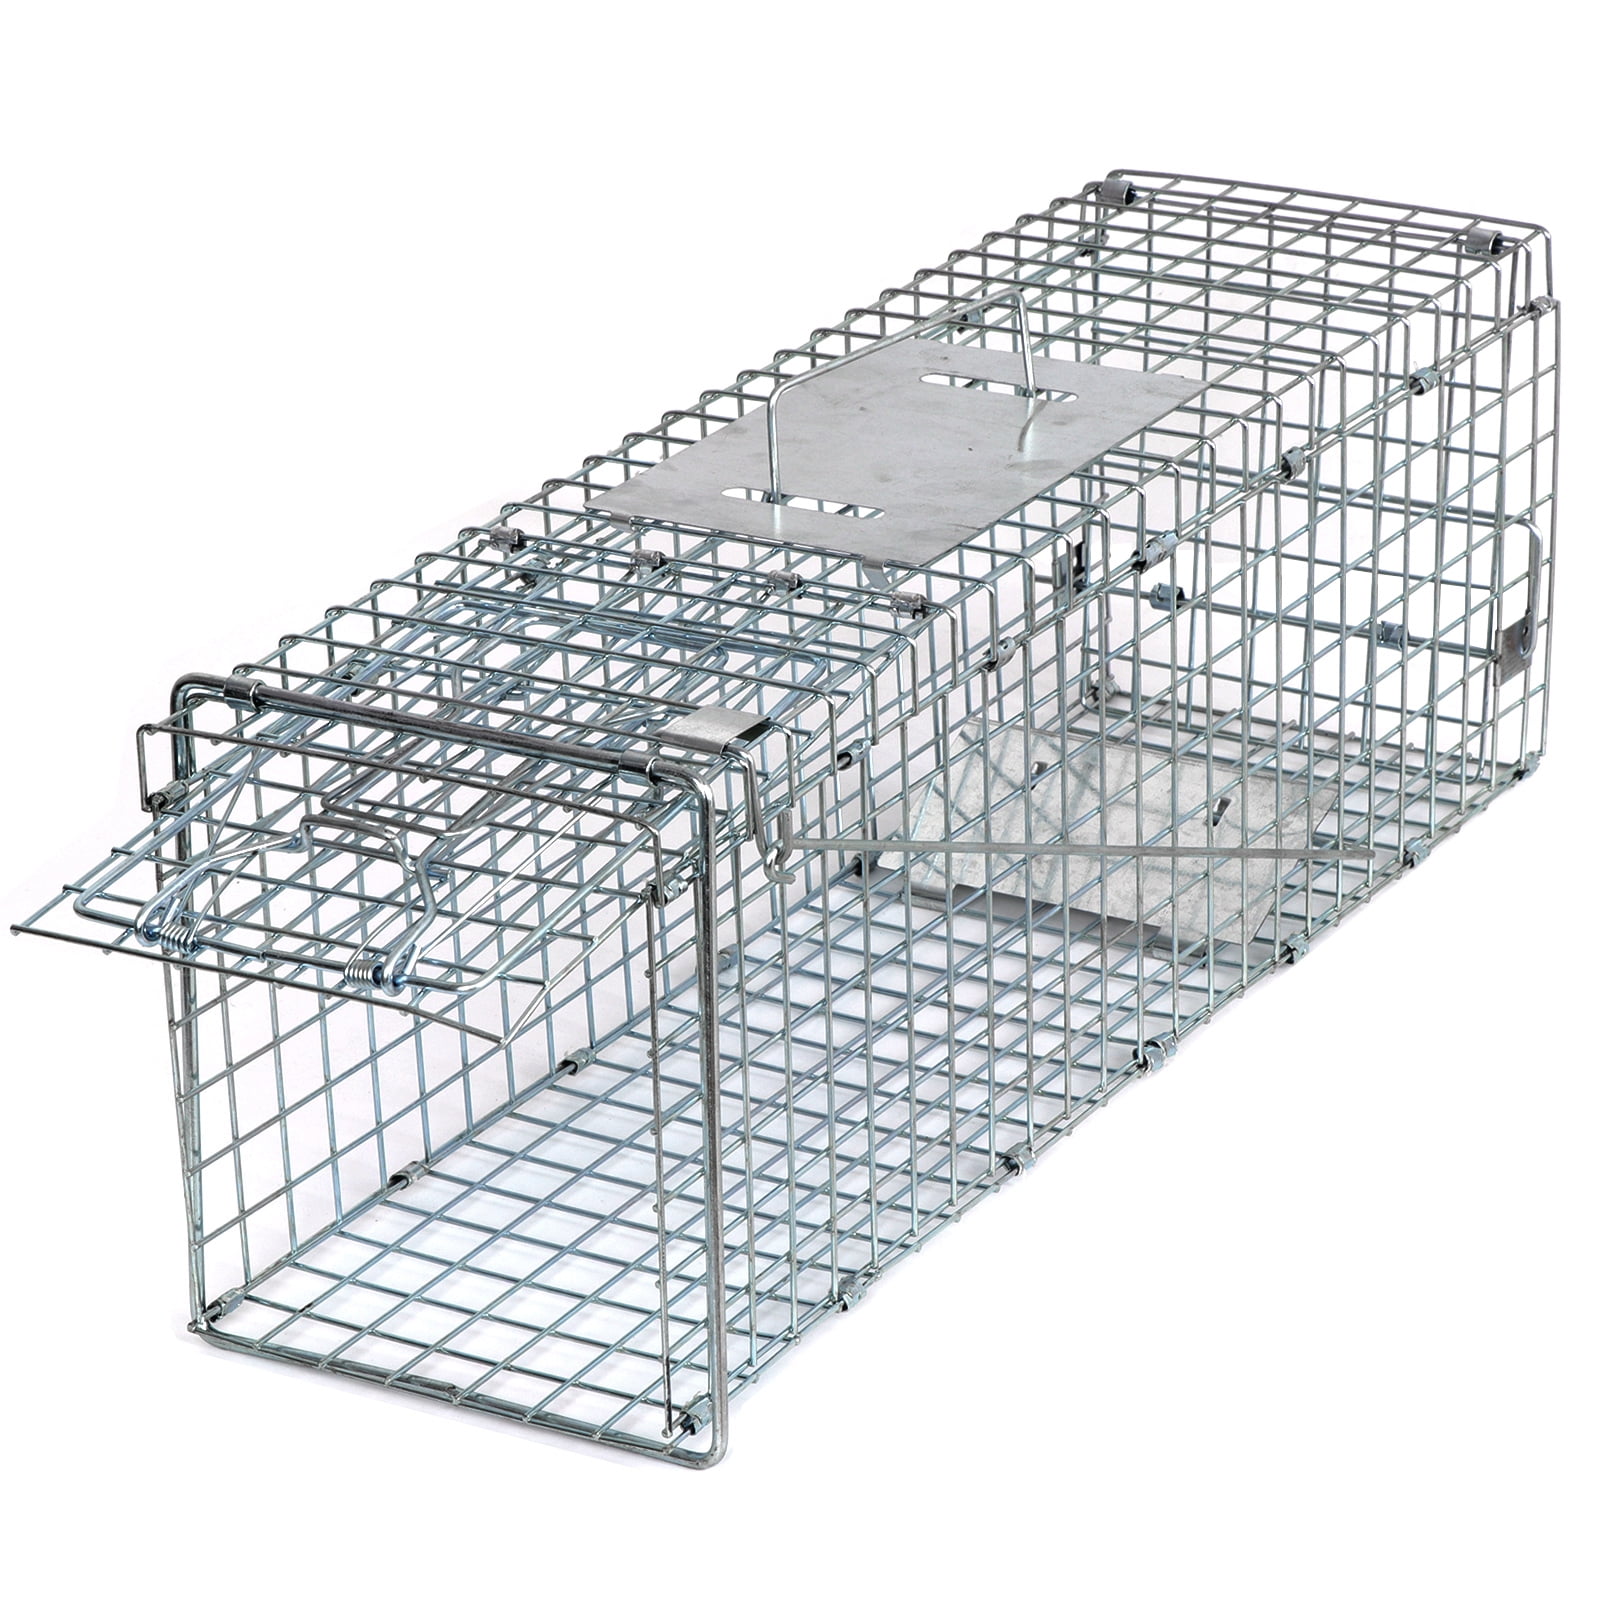 Details about   Live Animal Cage Trap Large Raccoon Groundhog Rabbit Pest Hunting Catcher Cats 